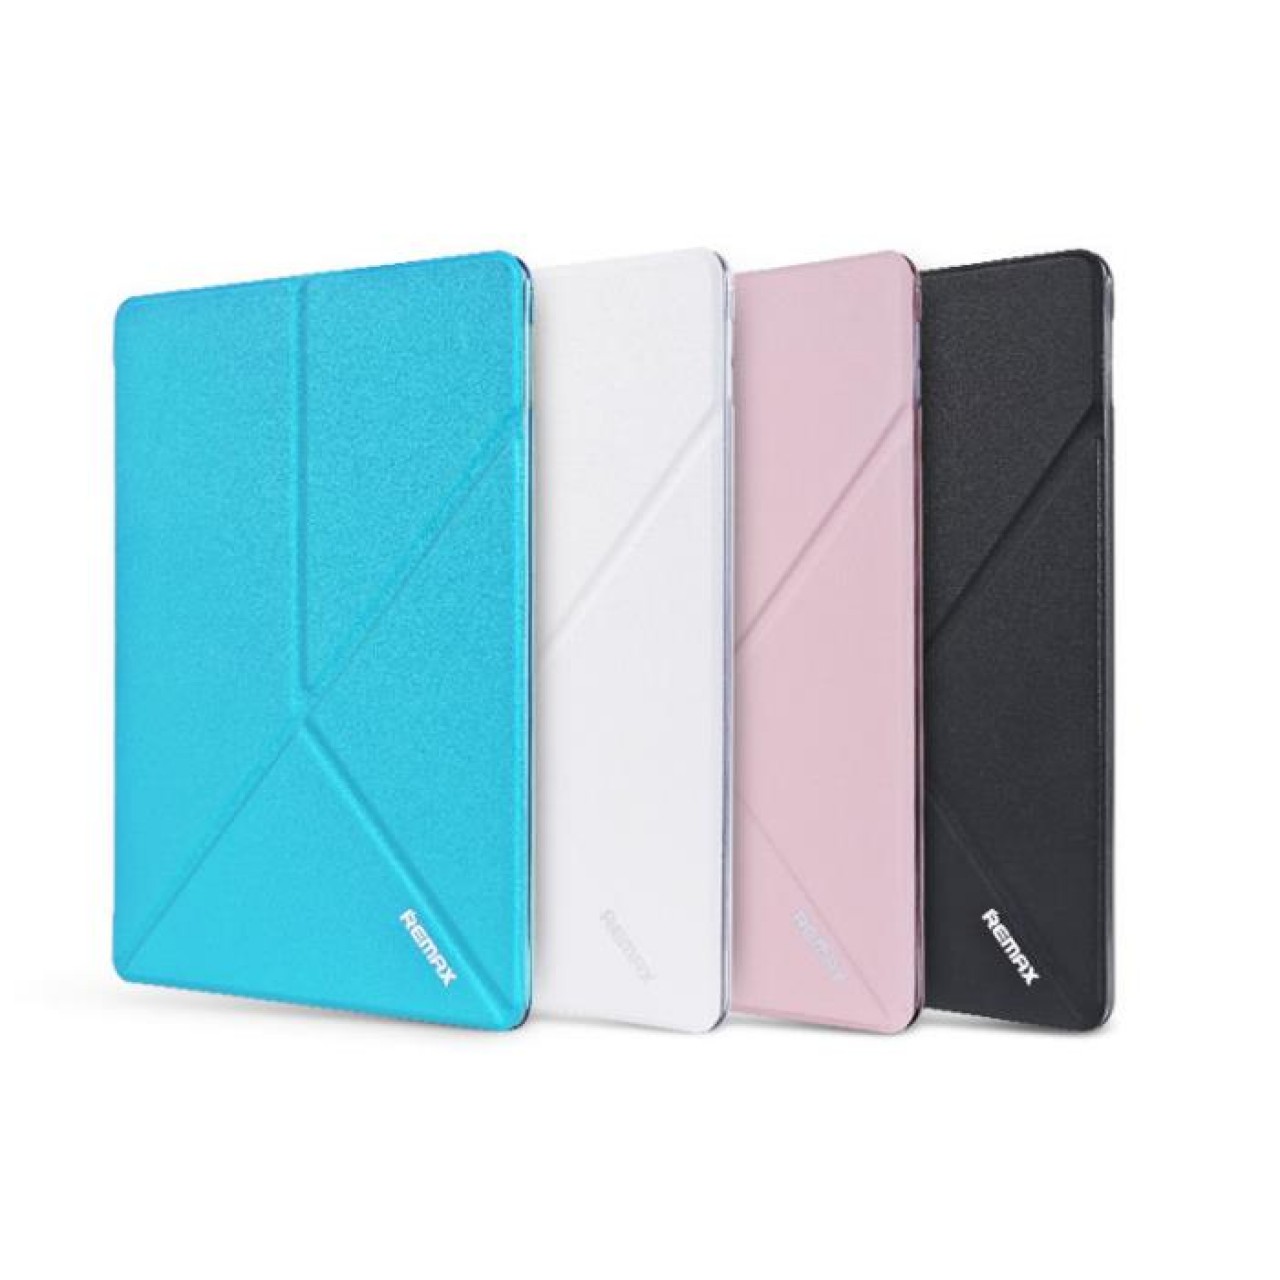 Tablet Case Remax For iPad Air 2 Pink TRANSFORMER